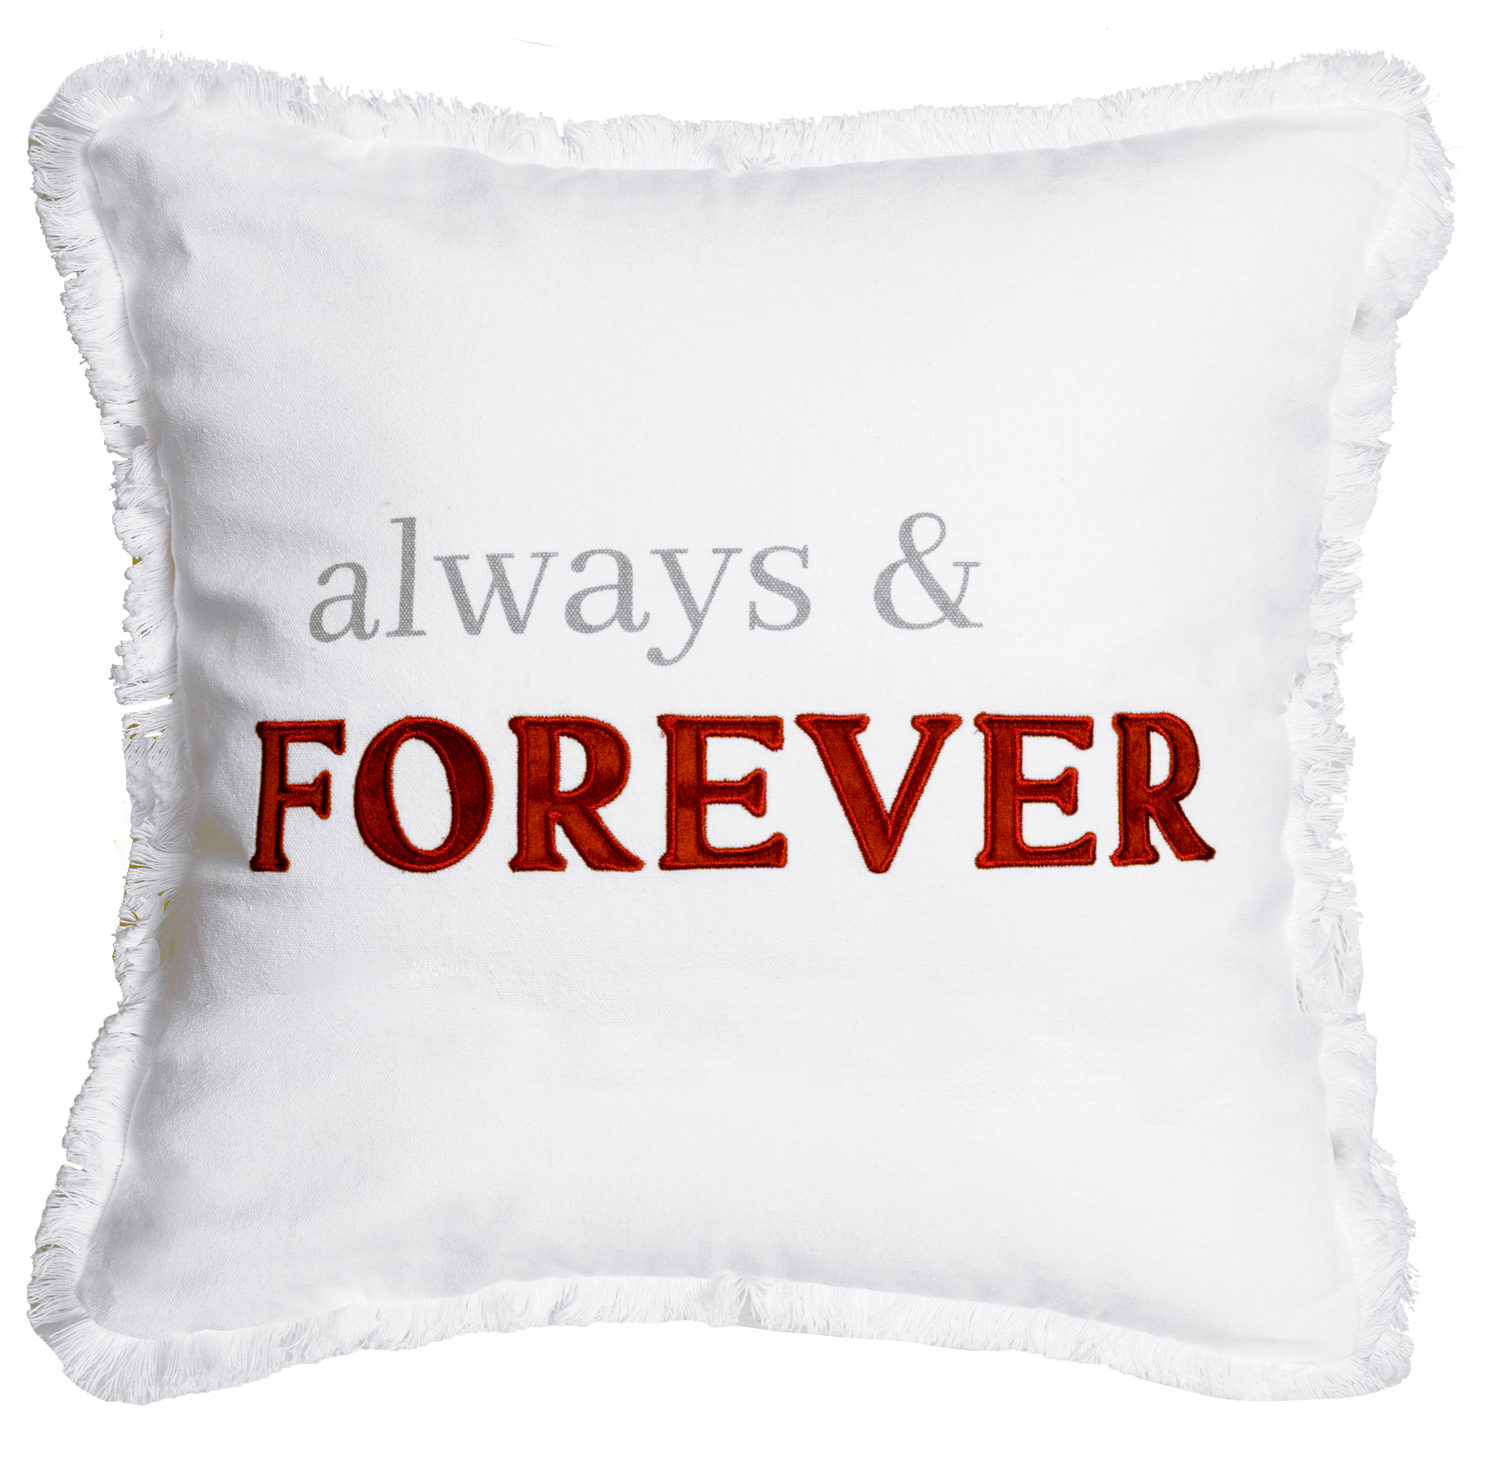 Always & Forever by Tossing Words Around - Always & Forever - 18" Throw Pillow Cover